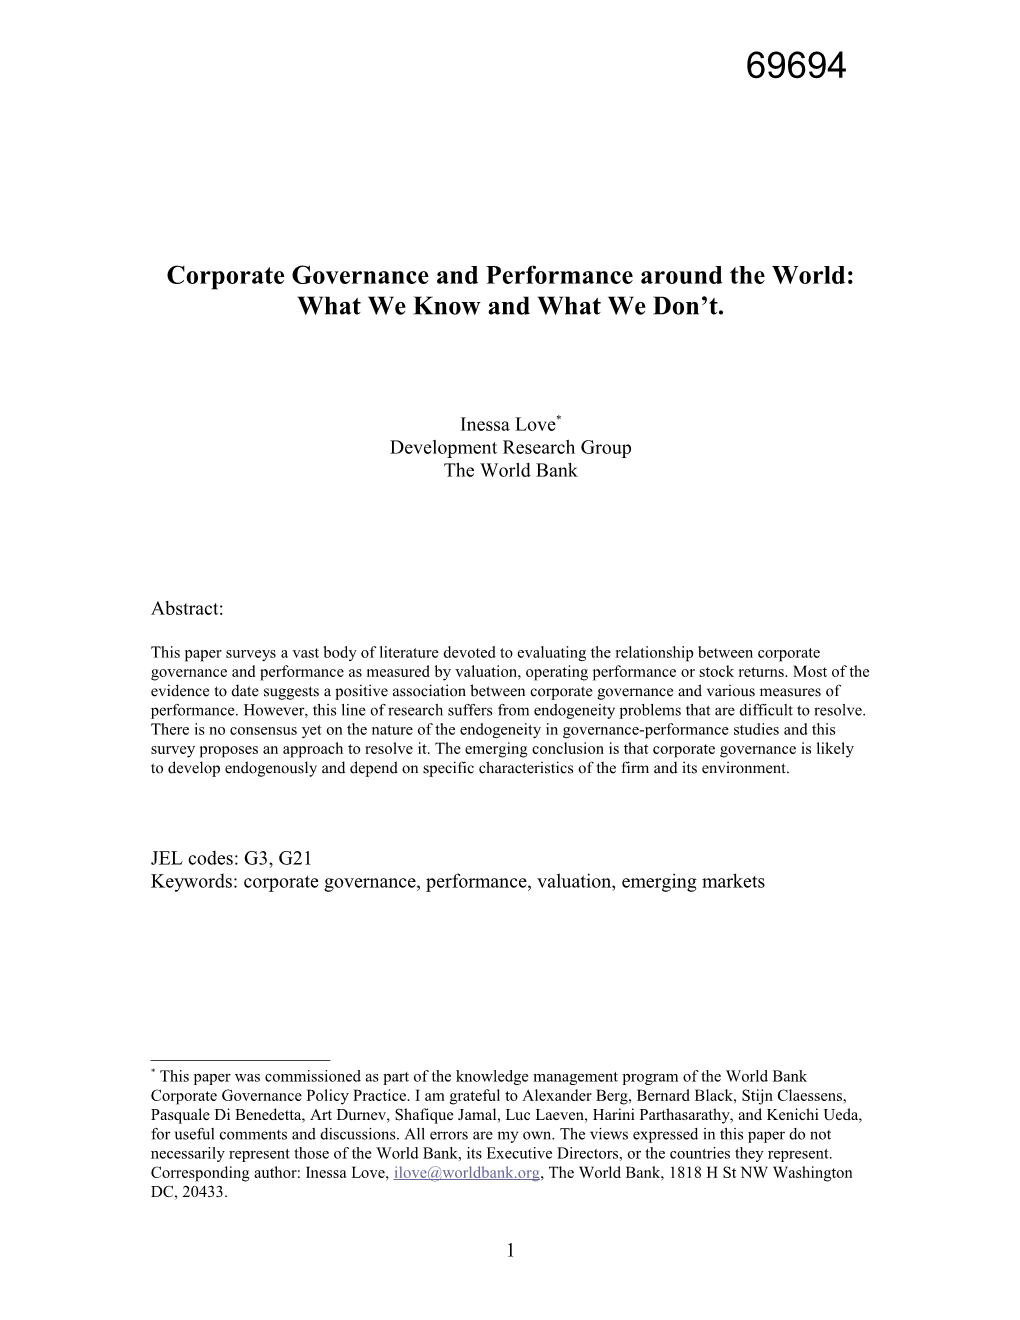 Survey of Empirical Literature on Corporate Governance and Performance